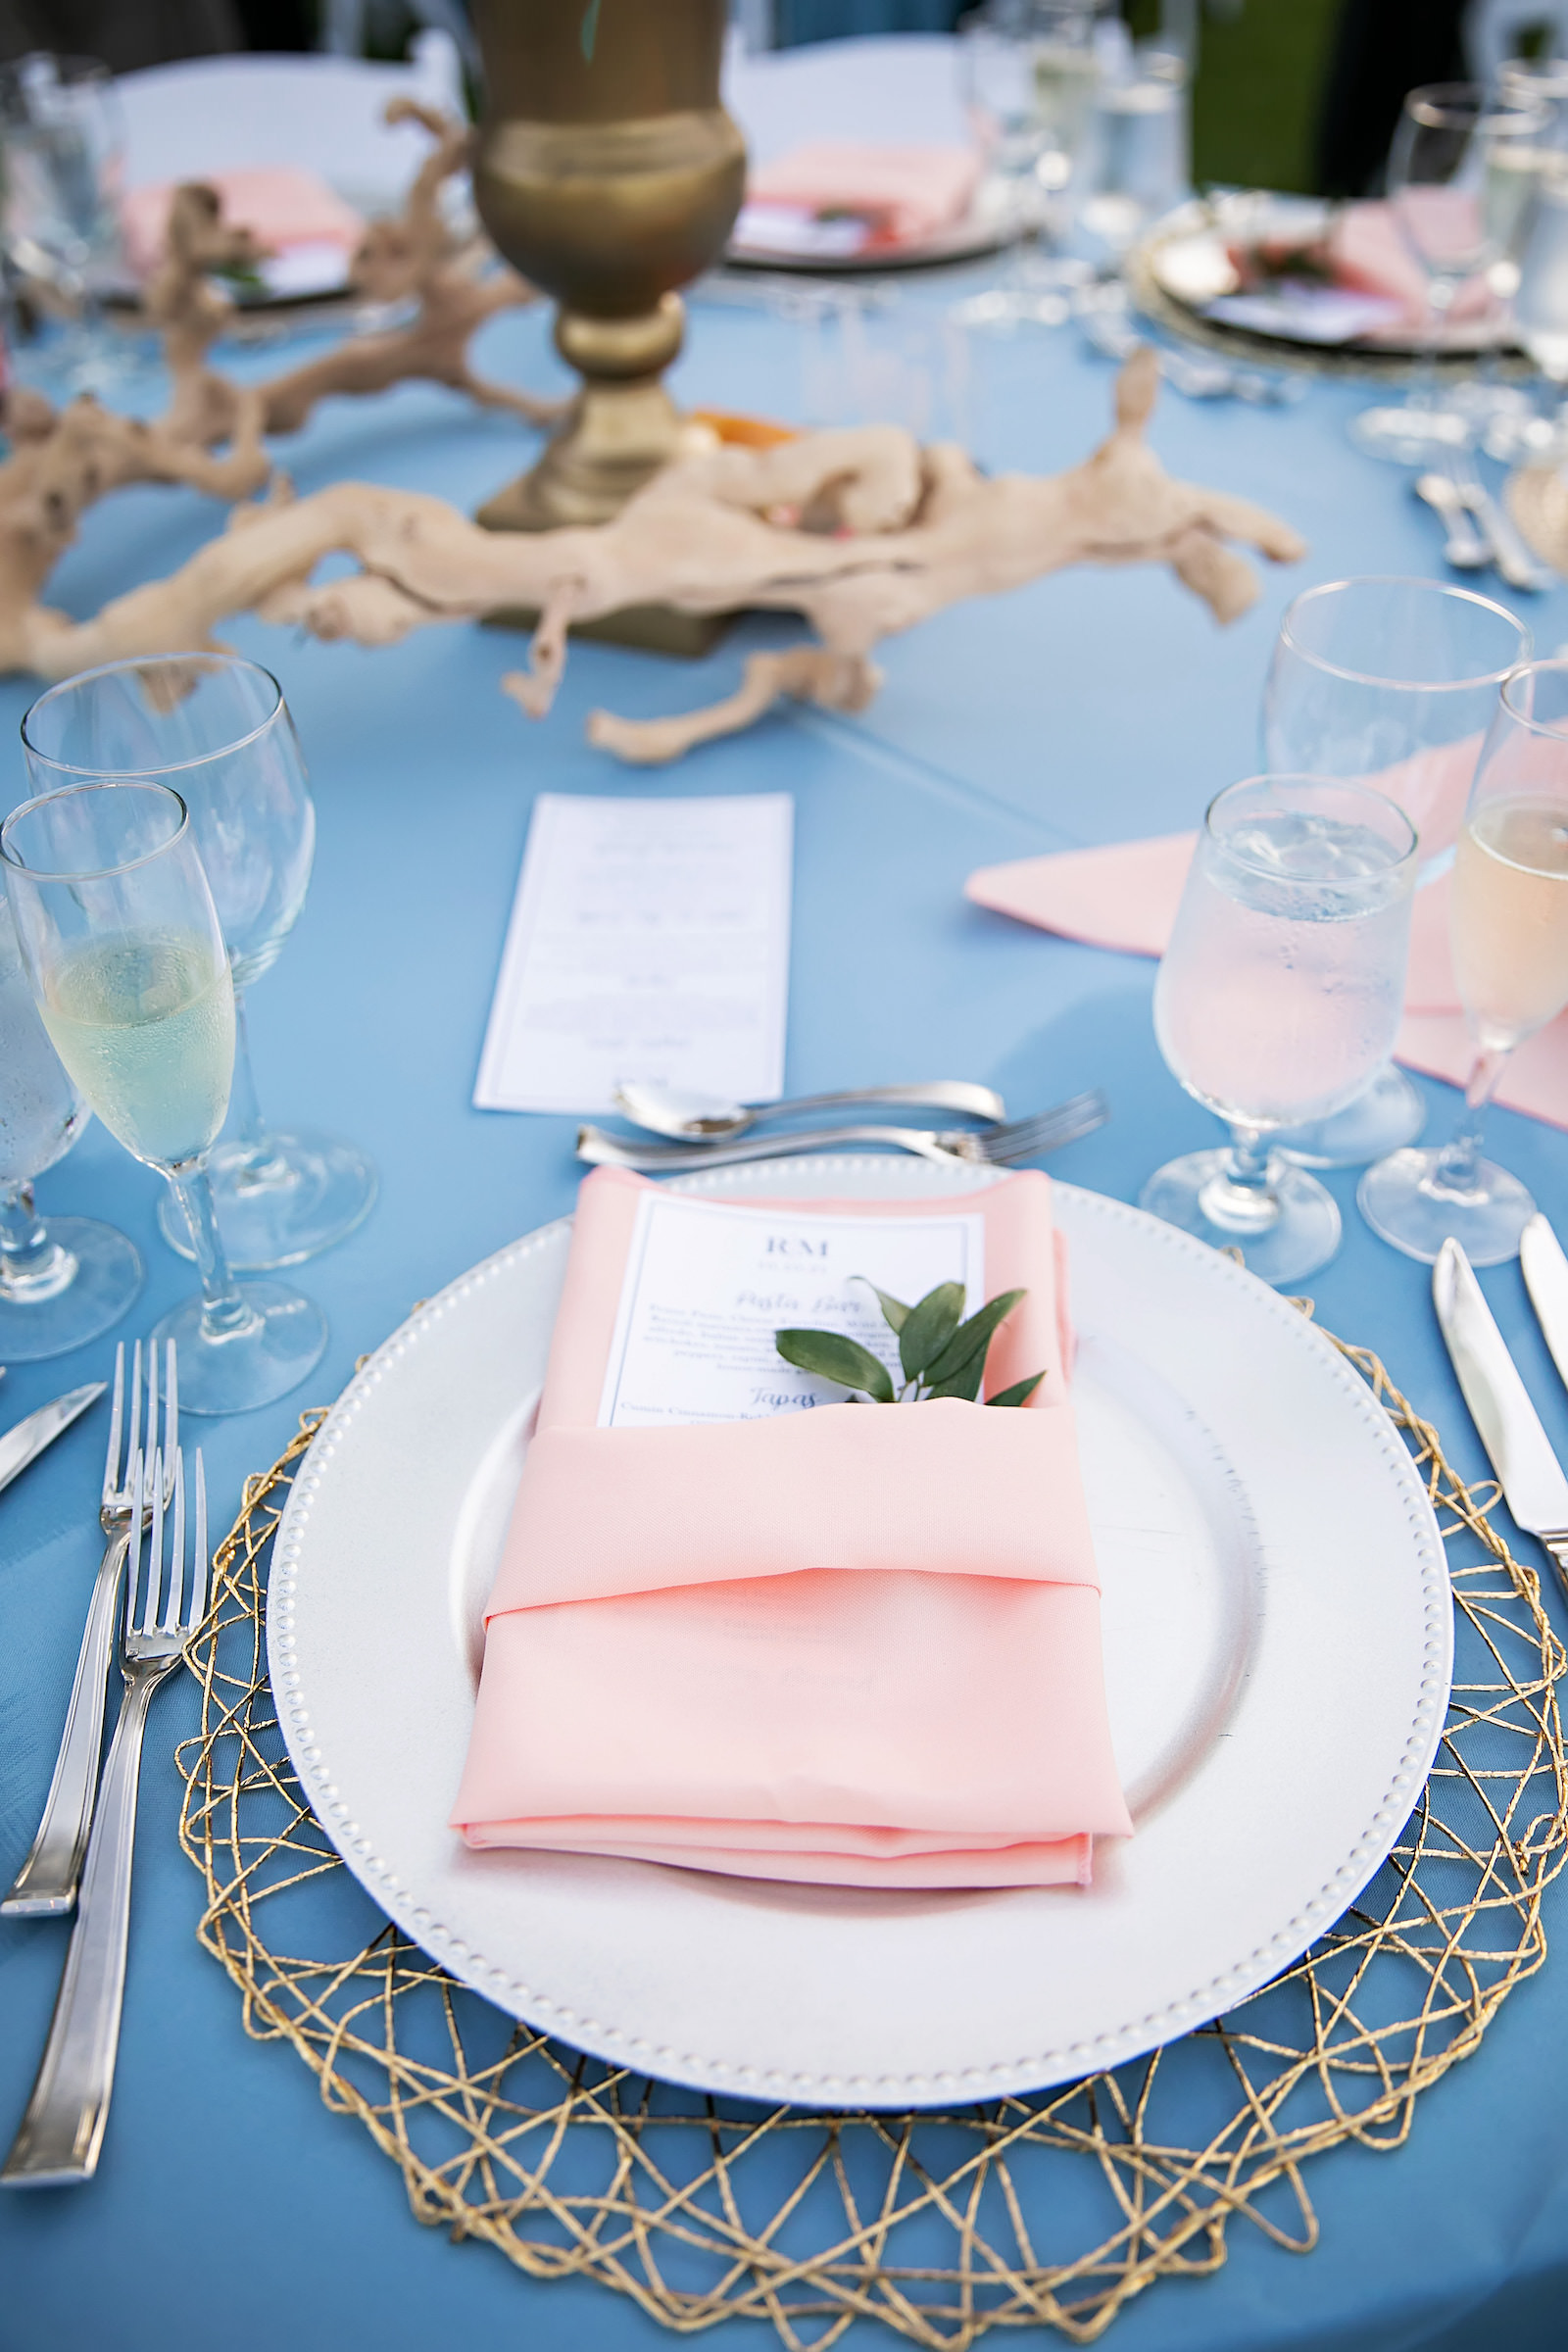 Elegant Place Setting with Peach Napkin and Greenery Detailing and Dusty Blue Linen